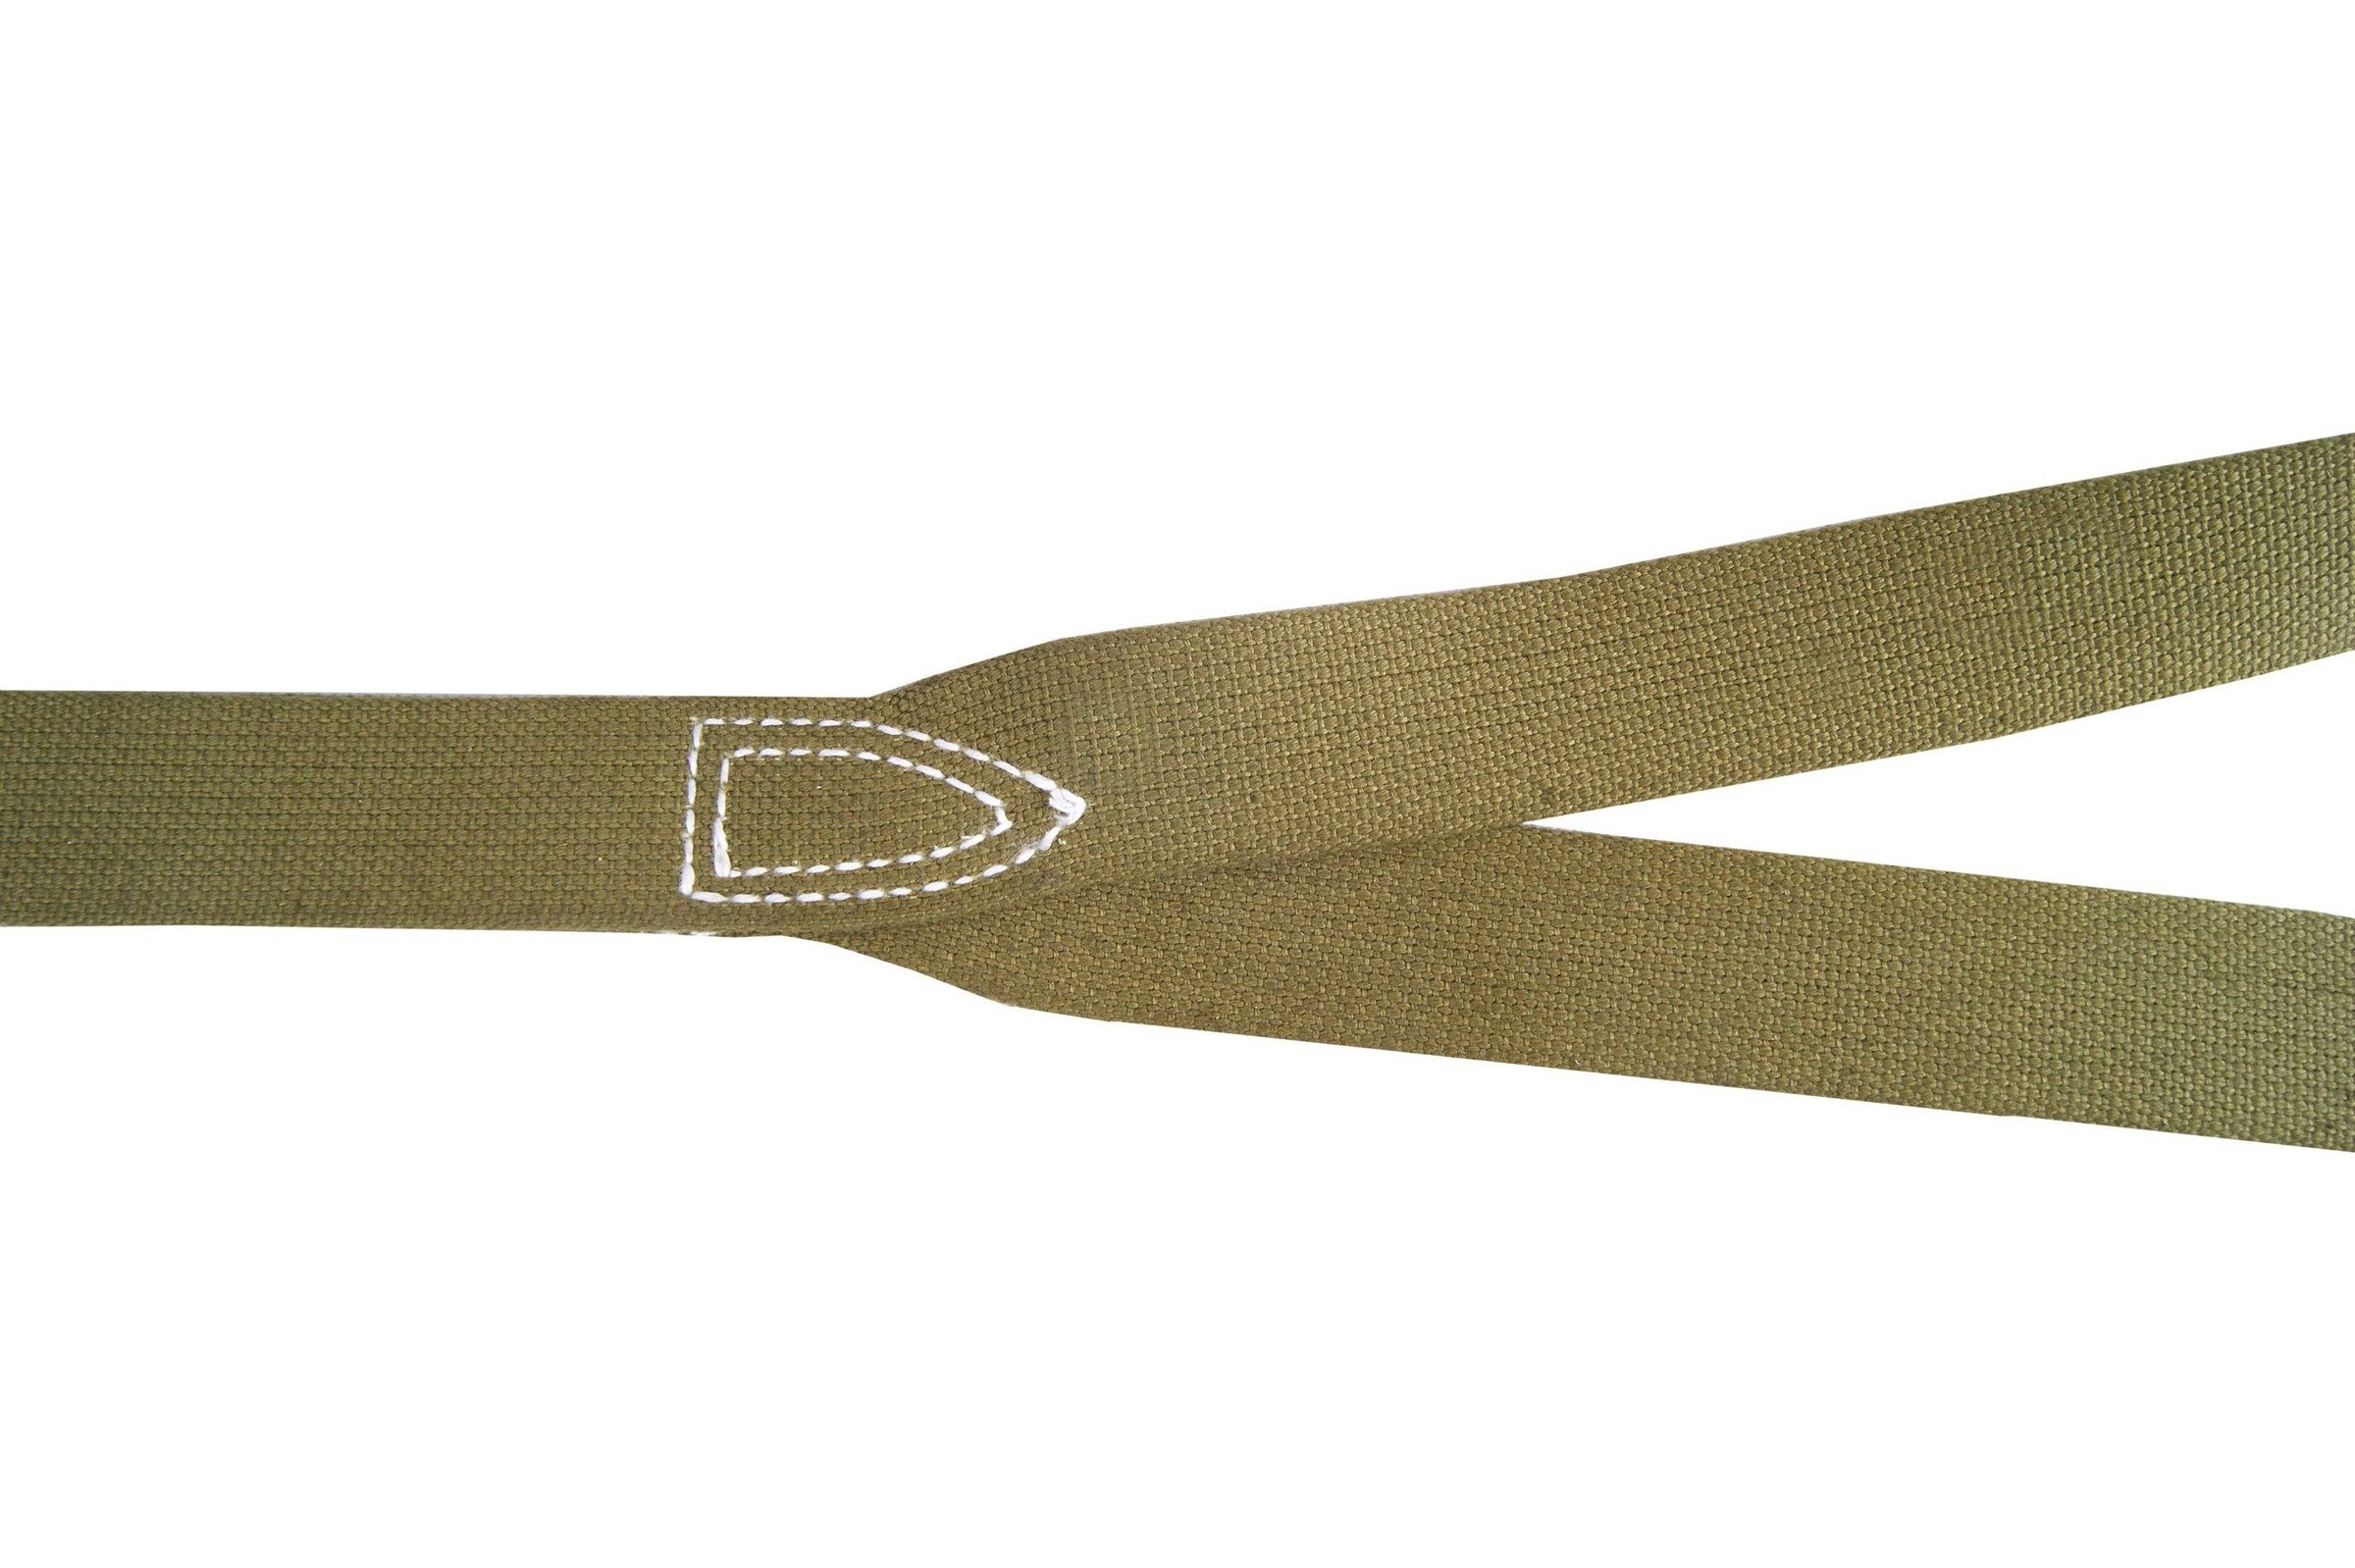 M1936 Red Army Y-straps - webbing - early type - repro 21,25 € | Nestof.pl